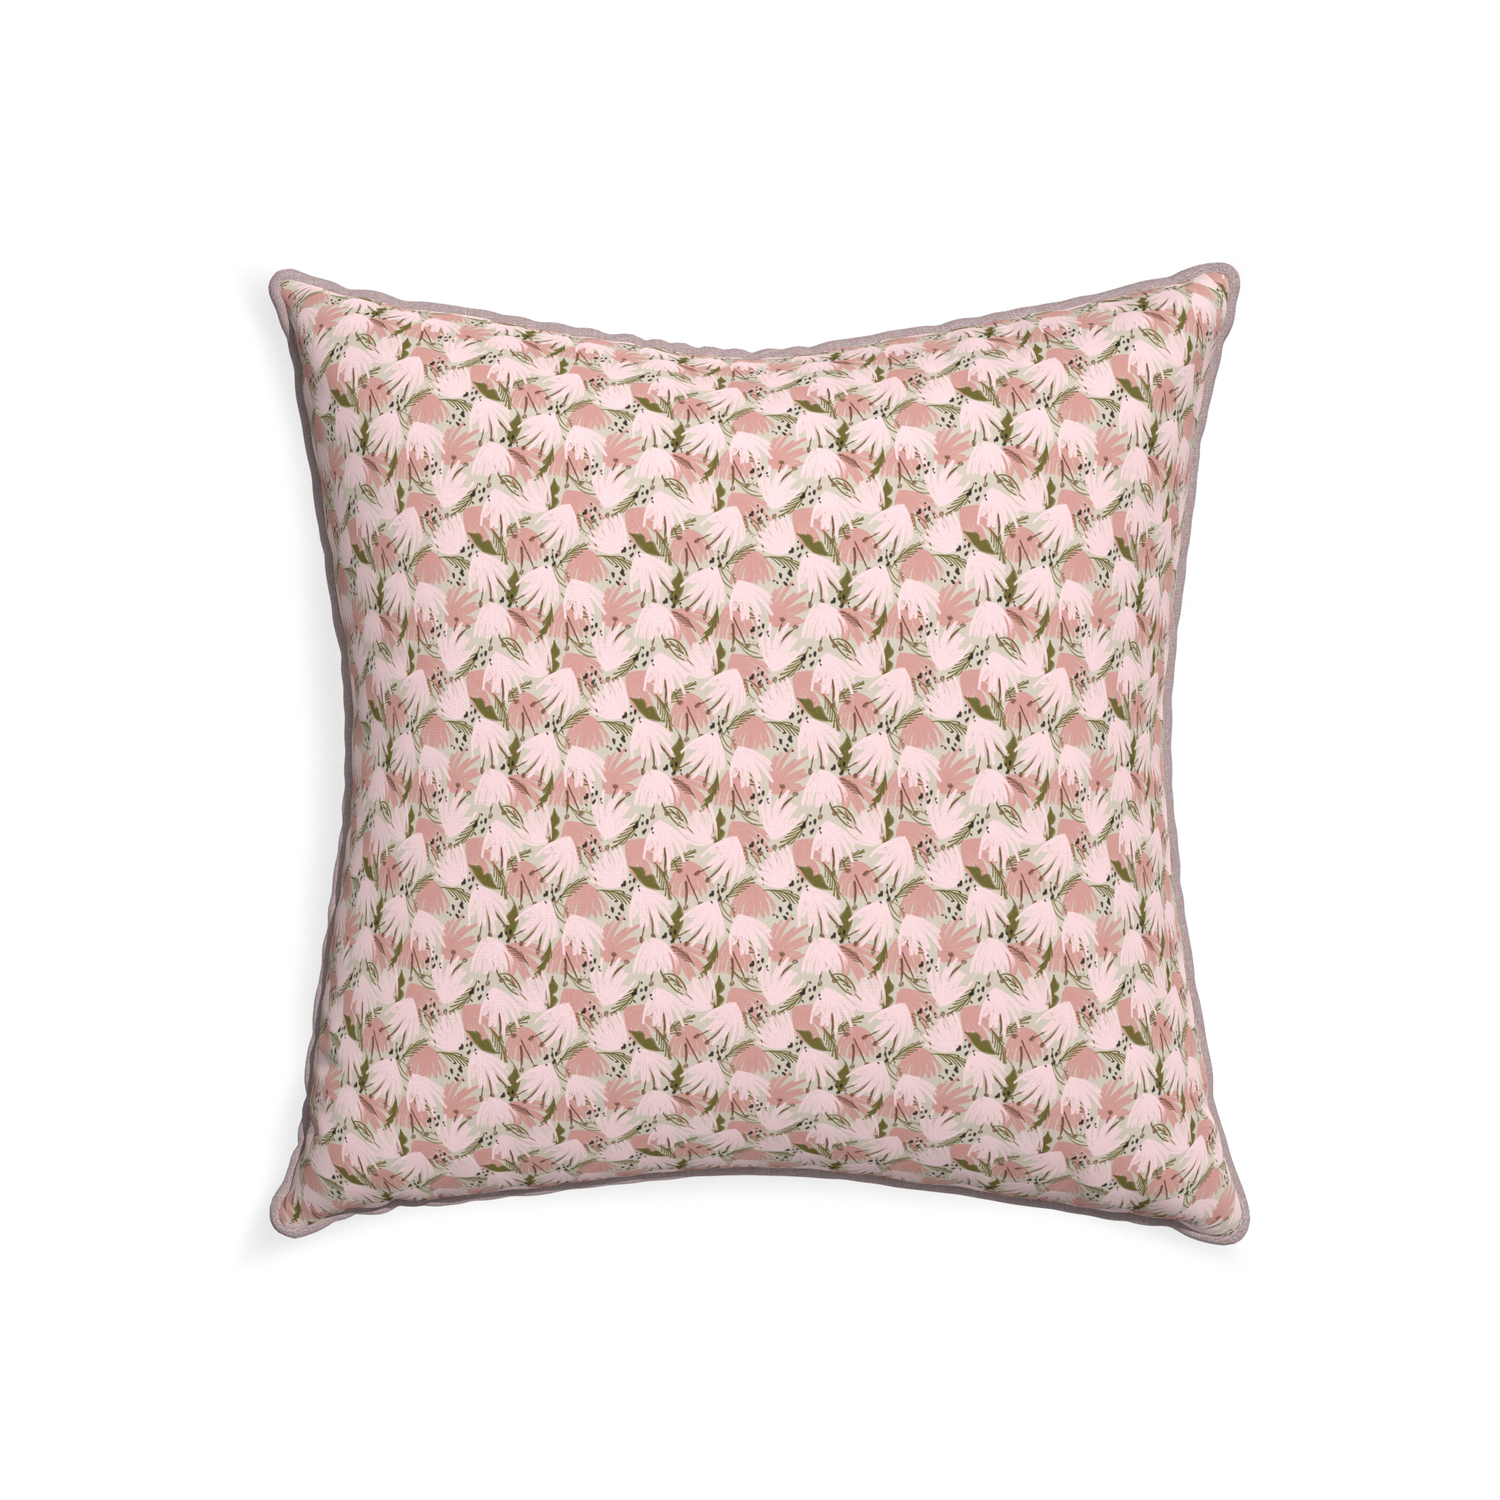 22-square eden pink custom pink floralpillow with orchid piping on white background